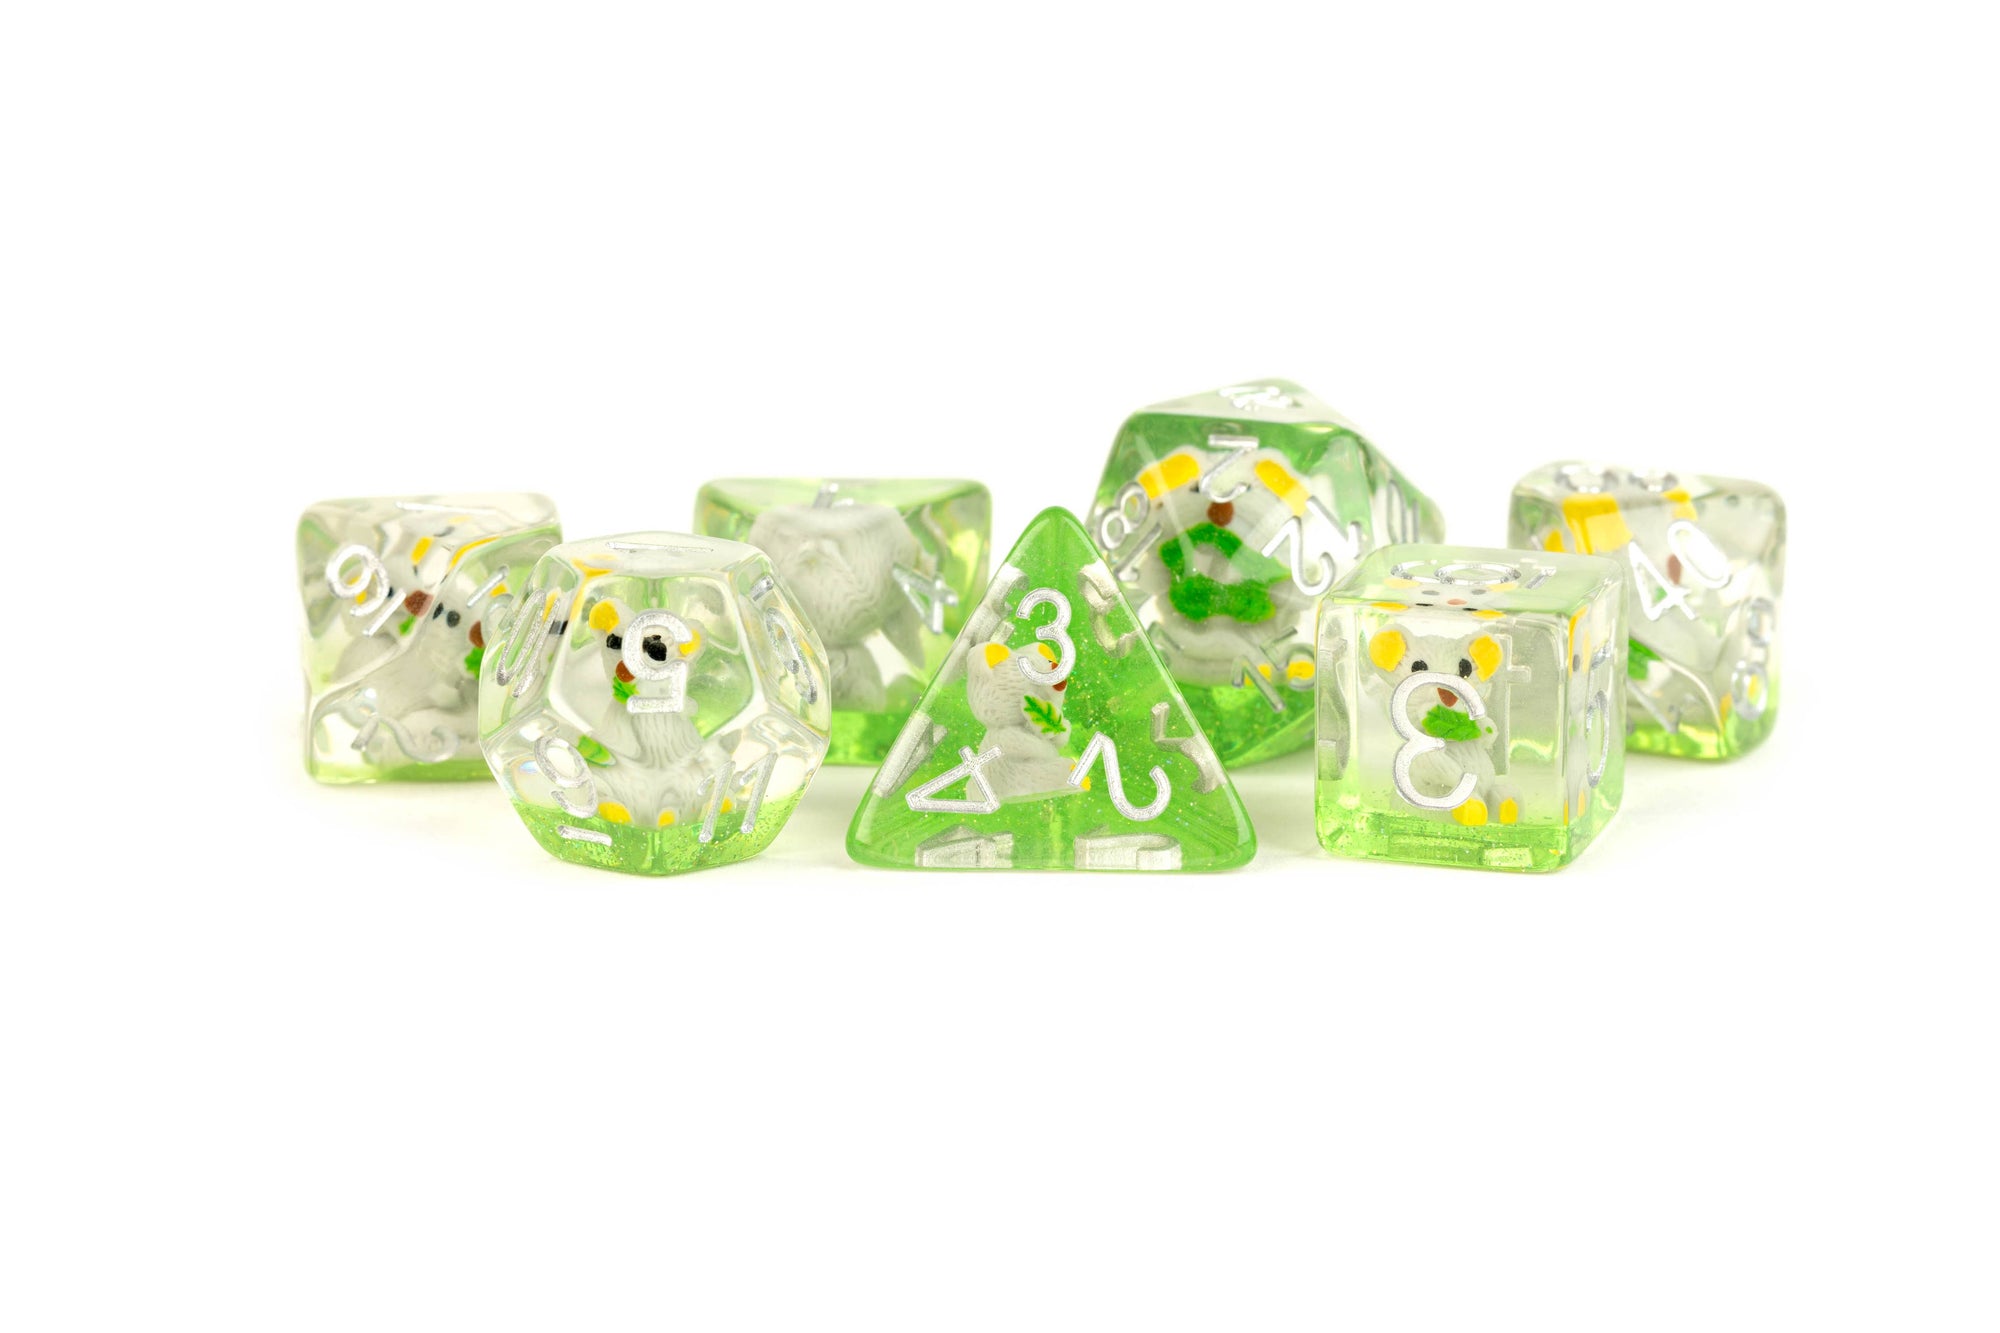 D&D Resin Inclusion Dice: Choose your Style!